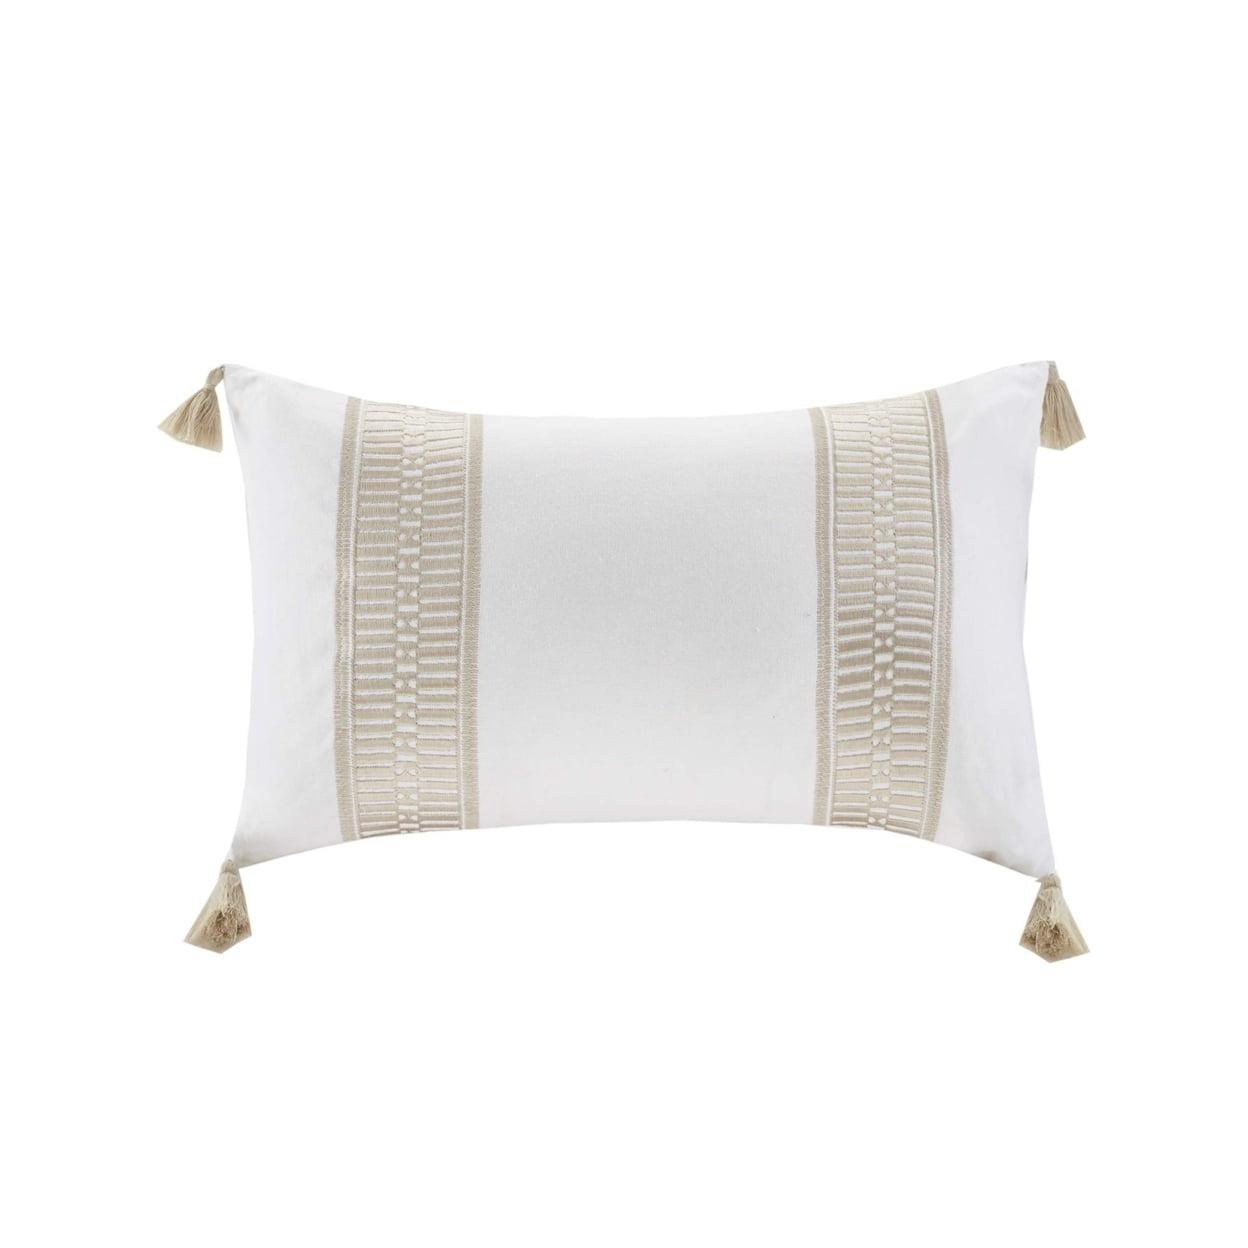 Cream Embroidered Cotton Oblong Decorative Pillow with Tassels